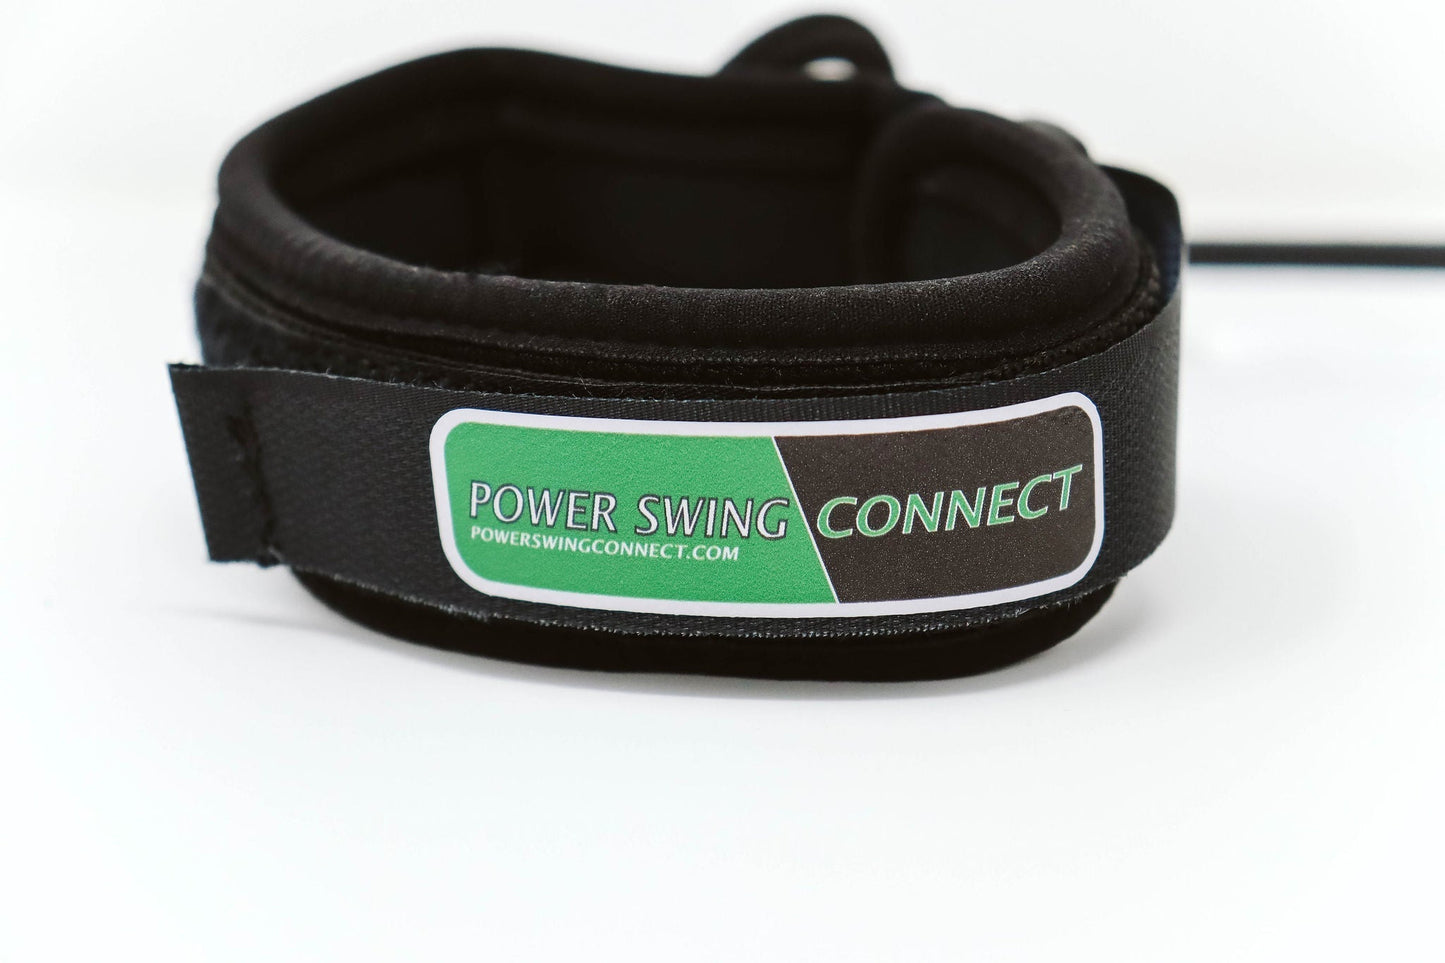 POWER SWING CONNECT (2 Pack 1 Slim & 1 Thick)